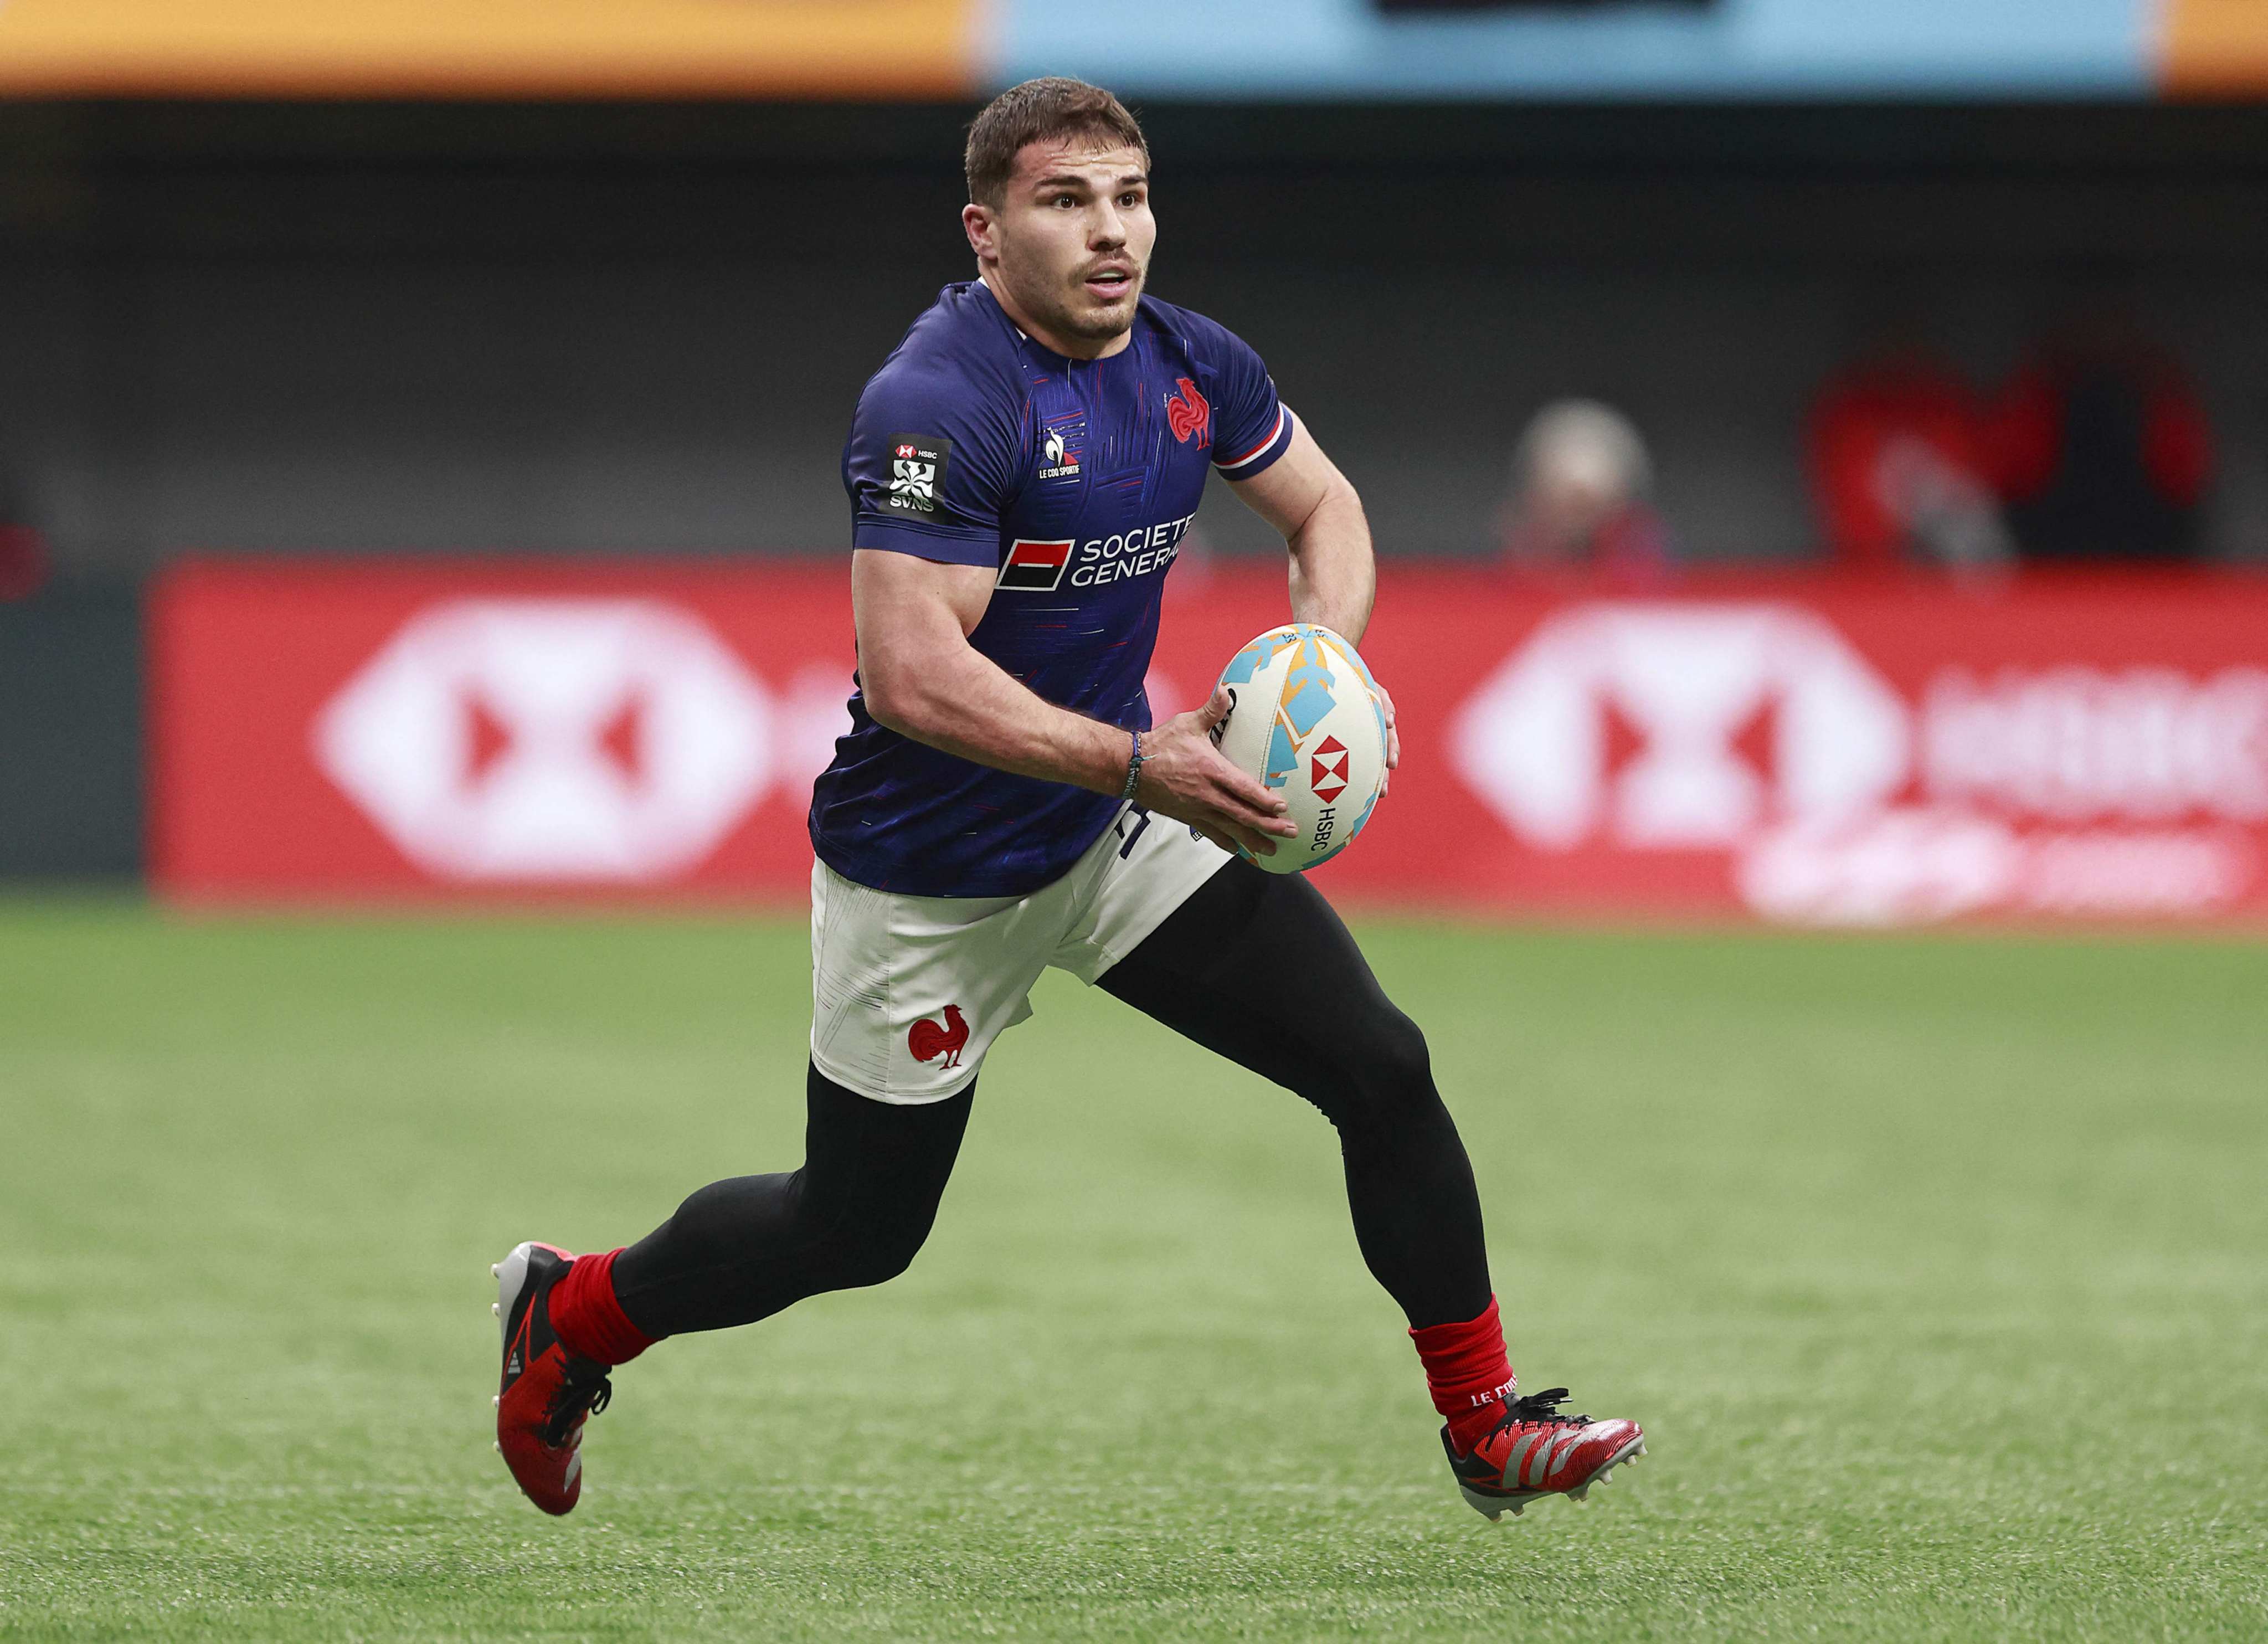 Antoine Dupont on the run for France in his debut HSBC SVNS tournament in Vancouver. Photo: Getty Images via AFP